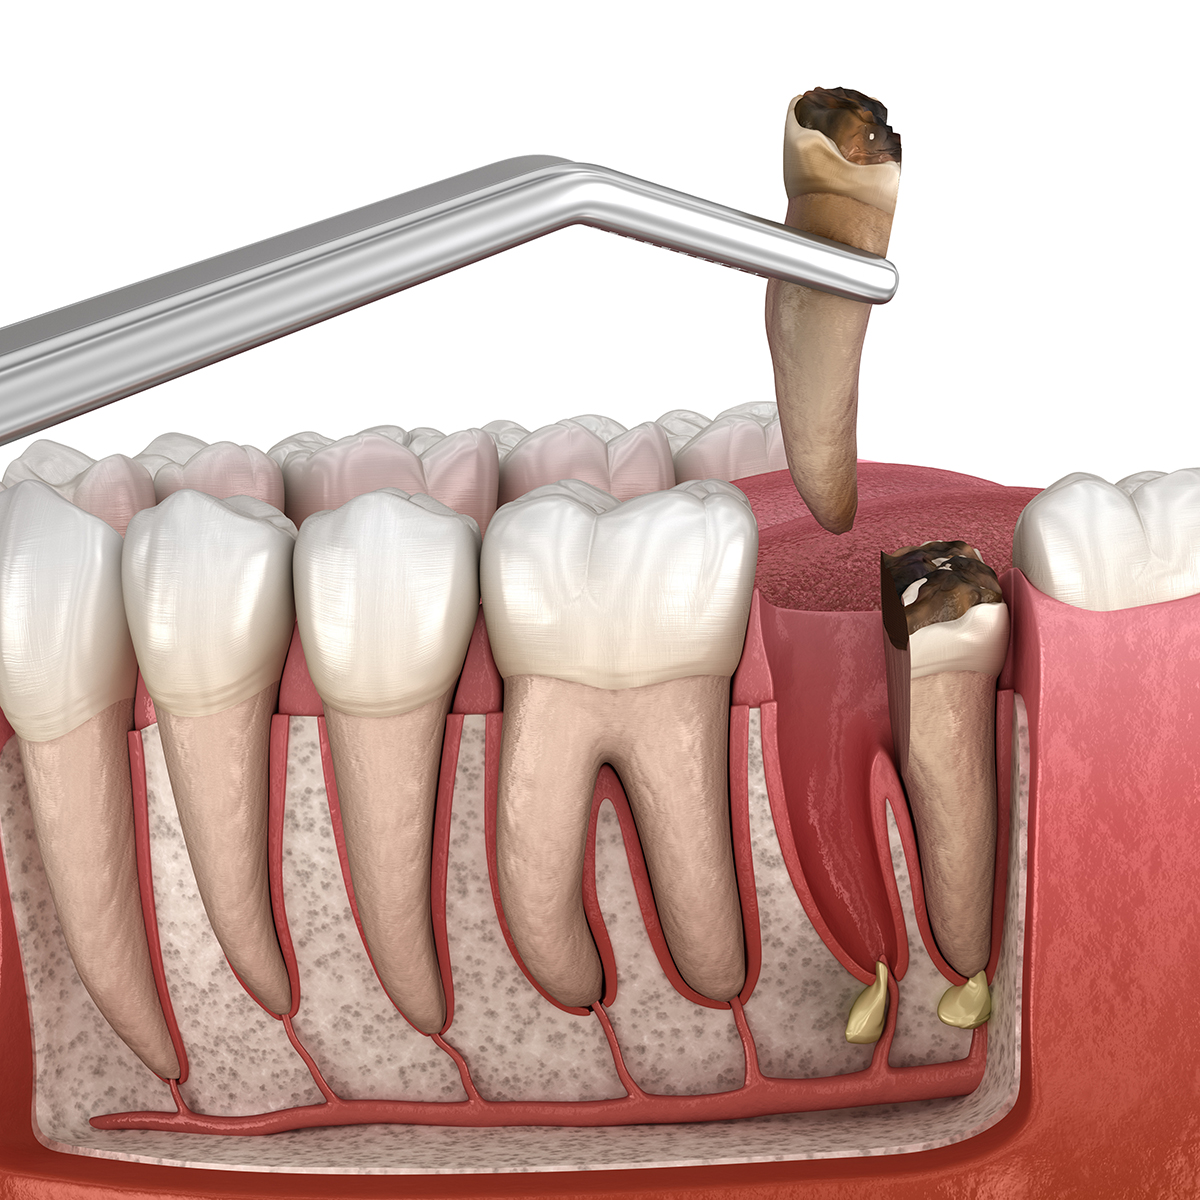 3D illustration of a section of a tooth being removed with forceps